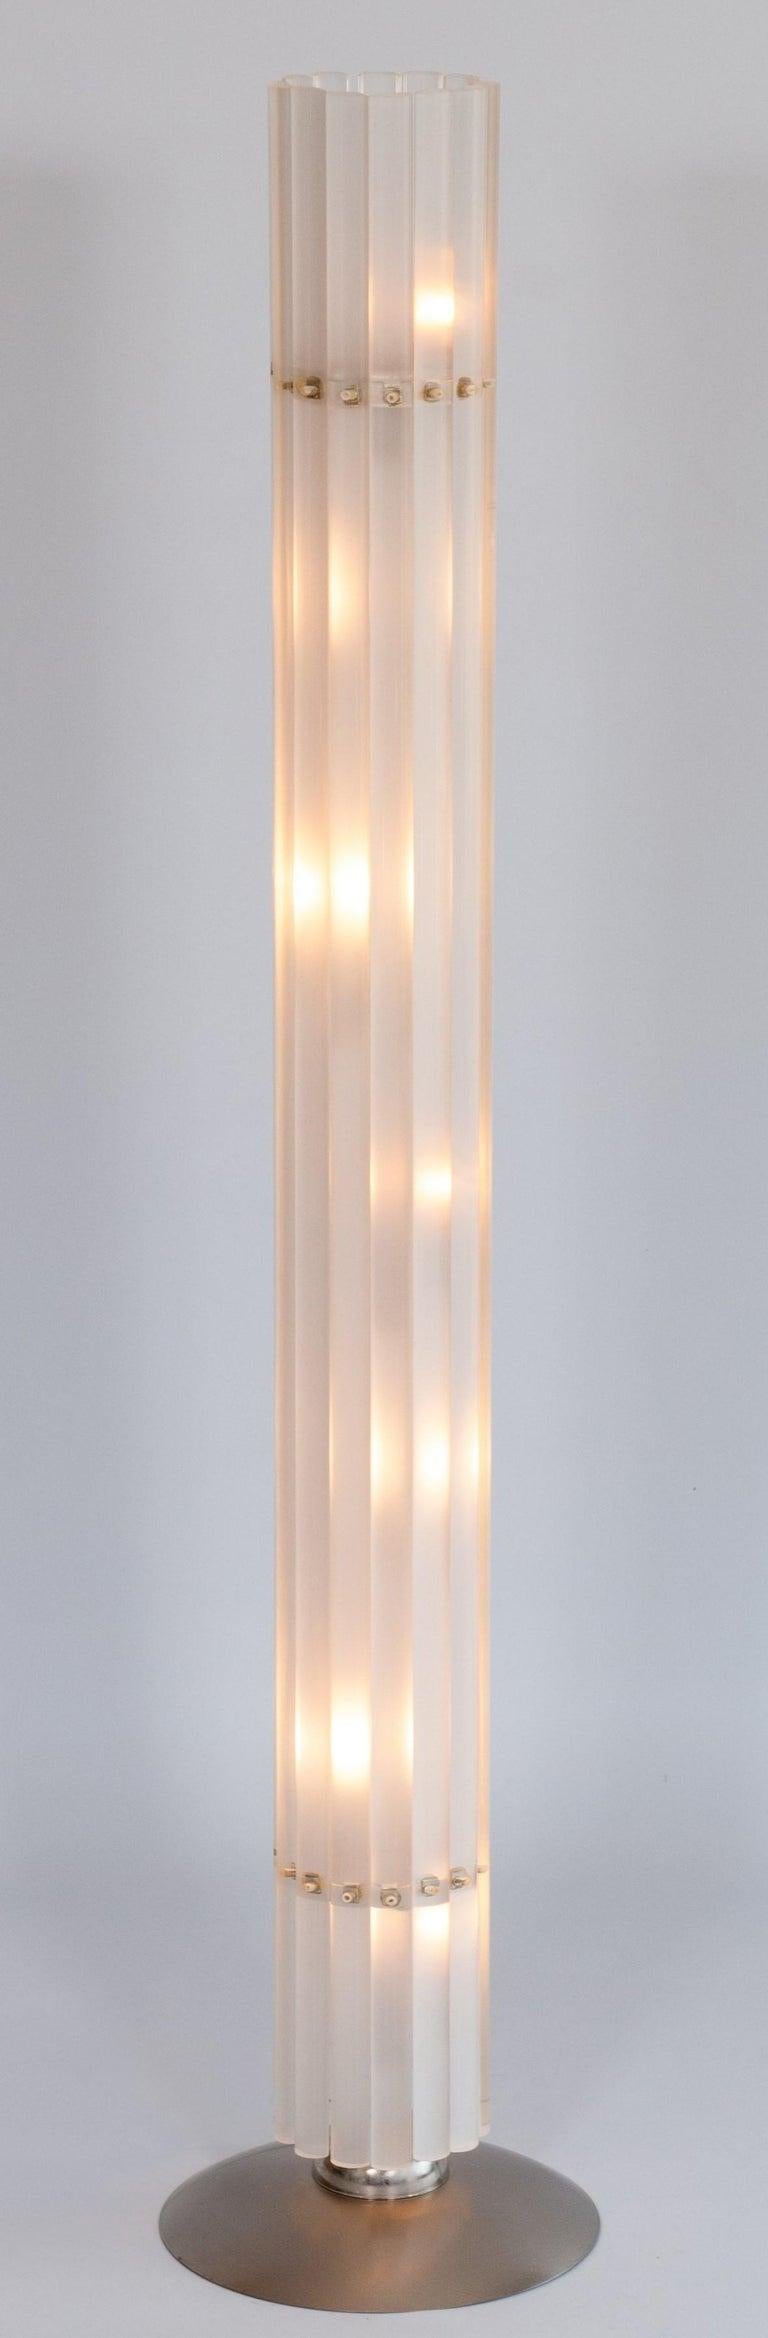 Hand-Crafted Bespoke White Cylinder Floor Lamp Murano Glass ArtistGiovanni Dalla Fina Italy For Sale